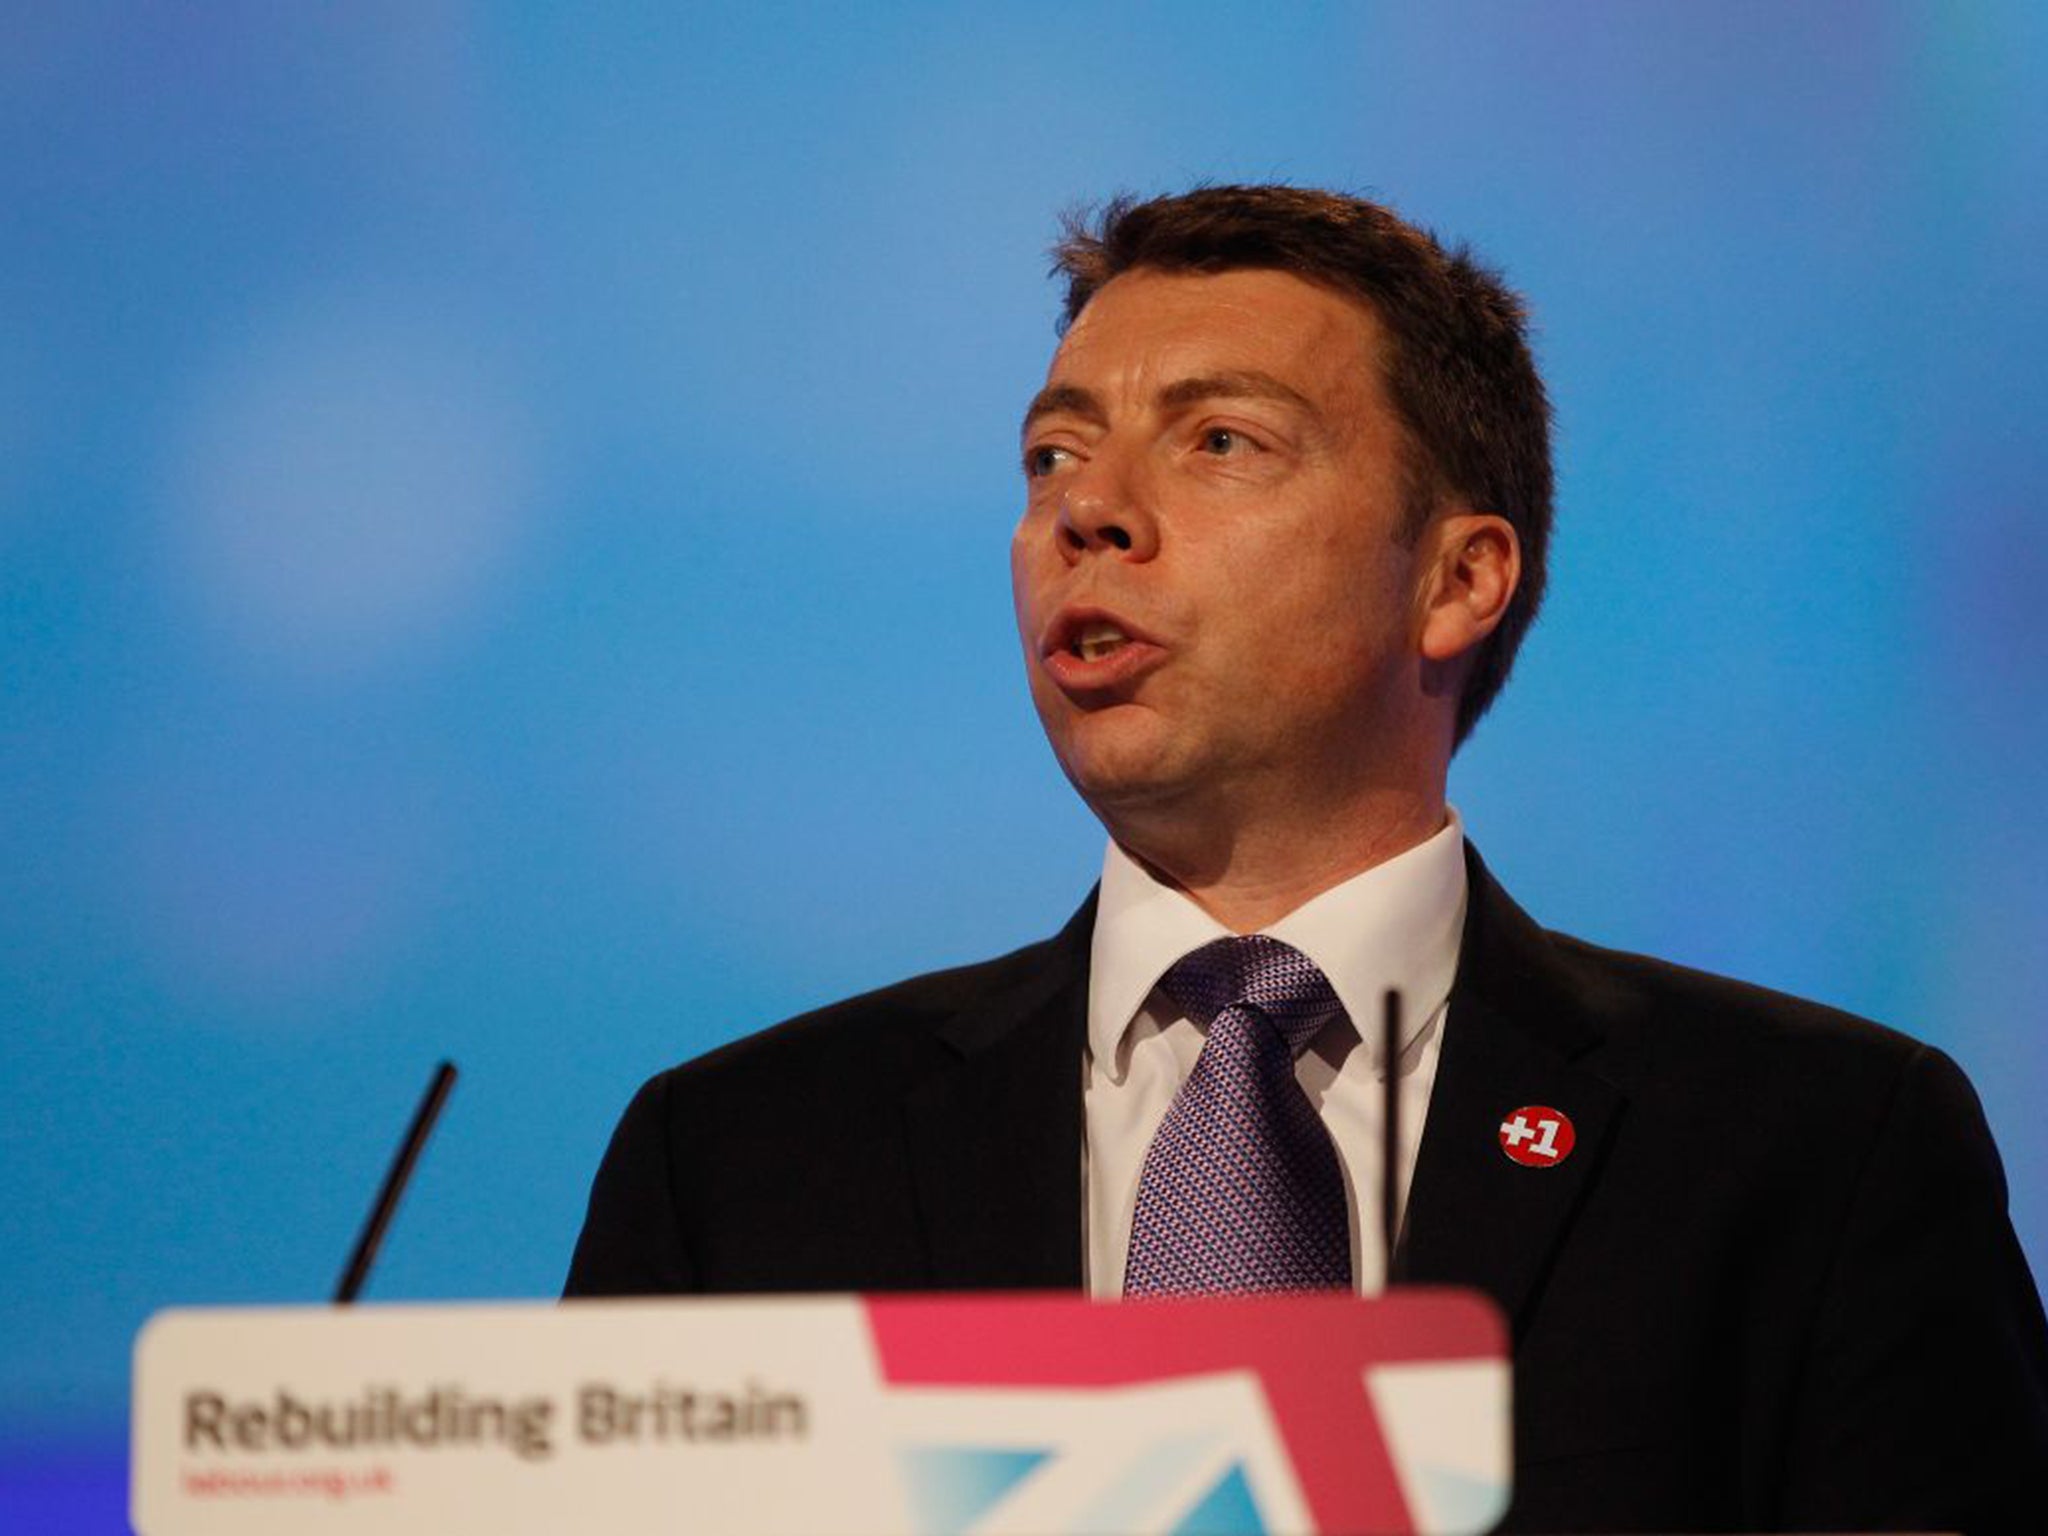 Iain McNicol inherited a Labour party deficit of £12m